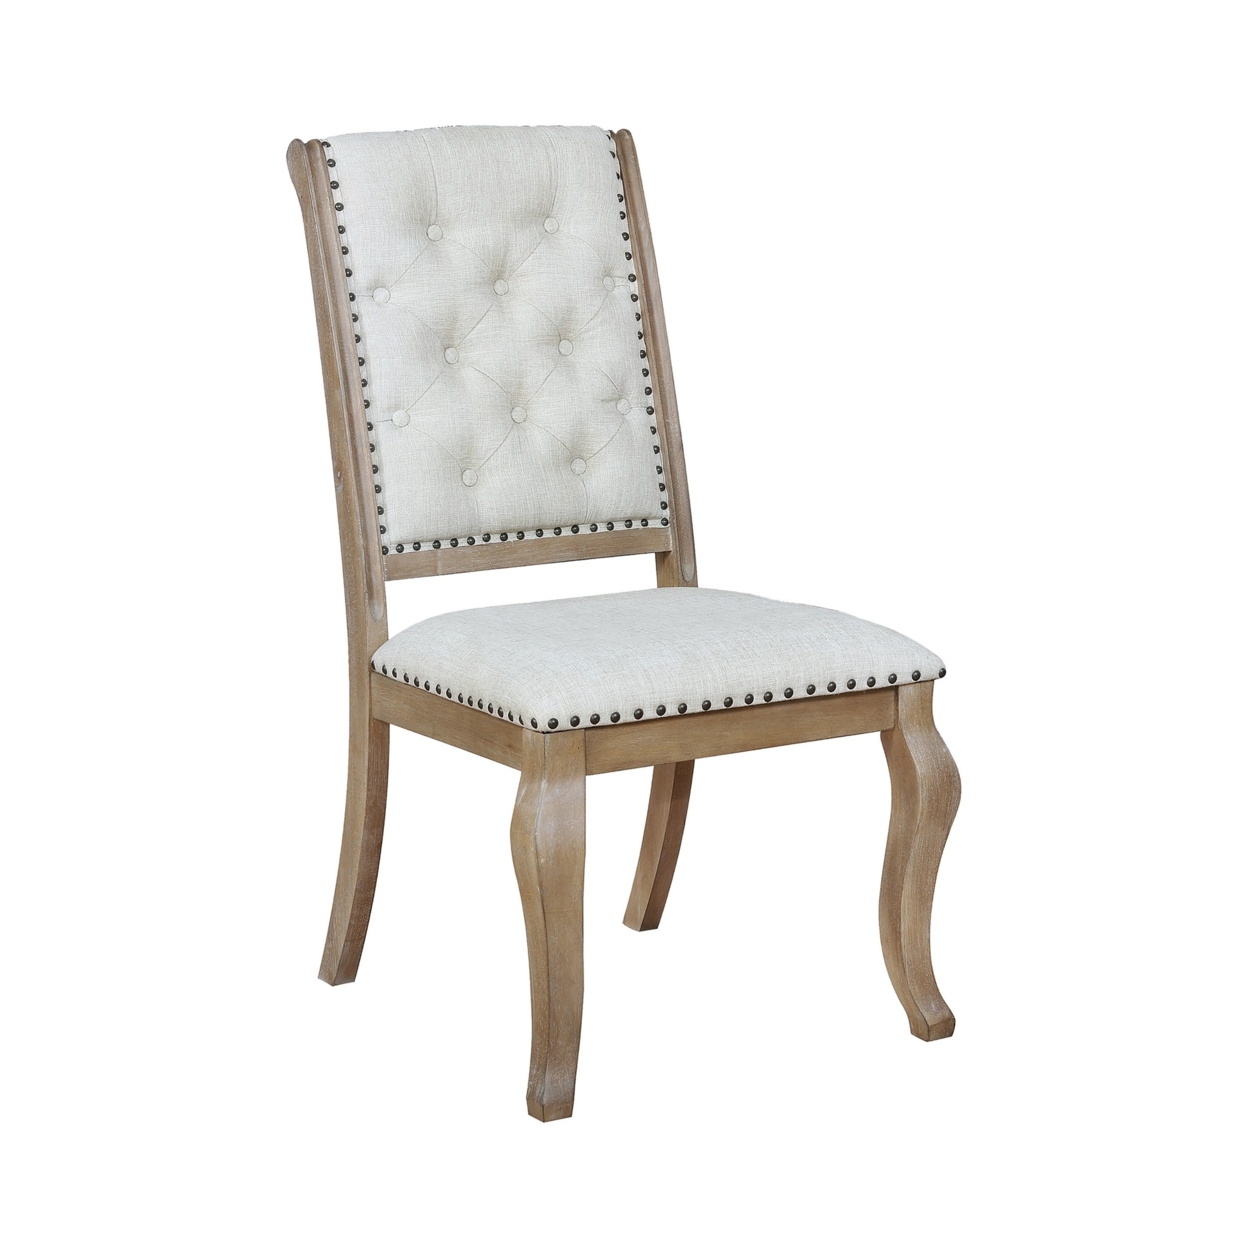 Button Tufted Fabric Side Chair With Cabriole Legs,Set Of 2,Brown And Cream- Saltoro Sherpi